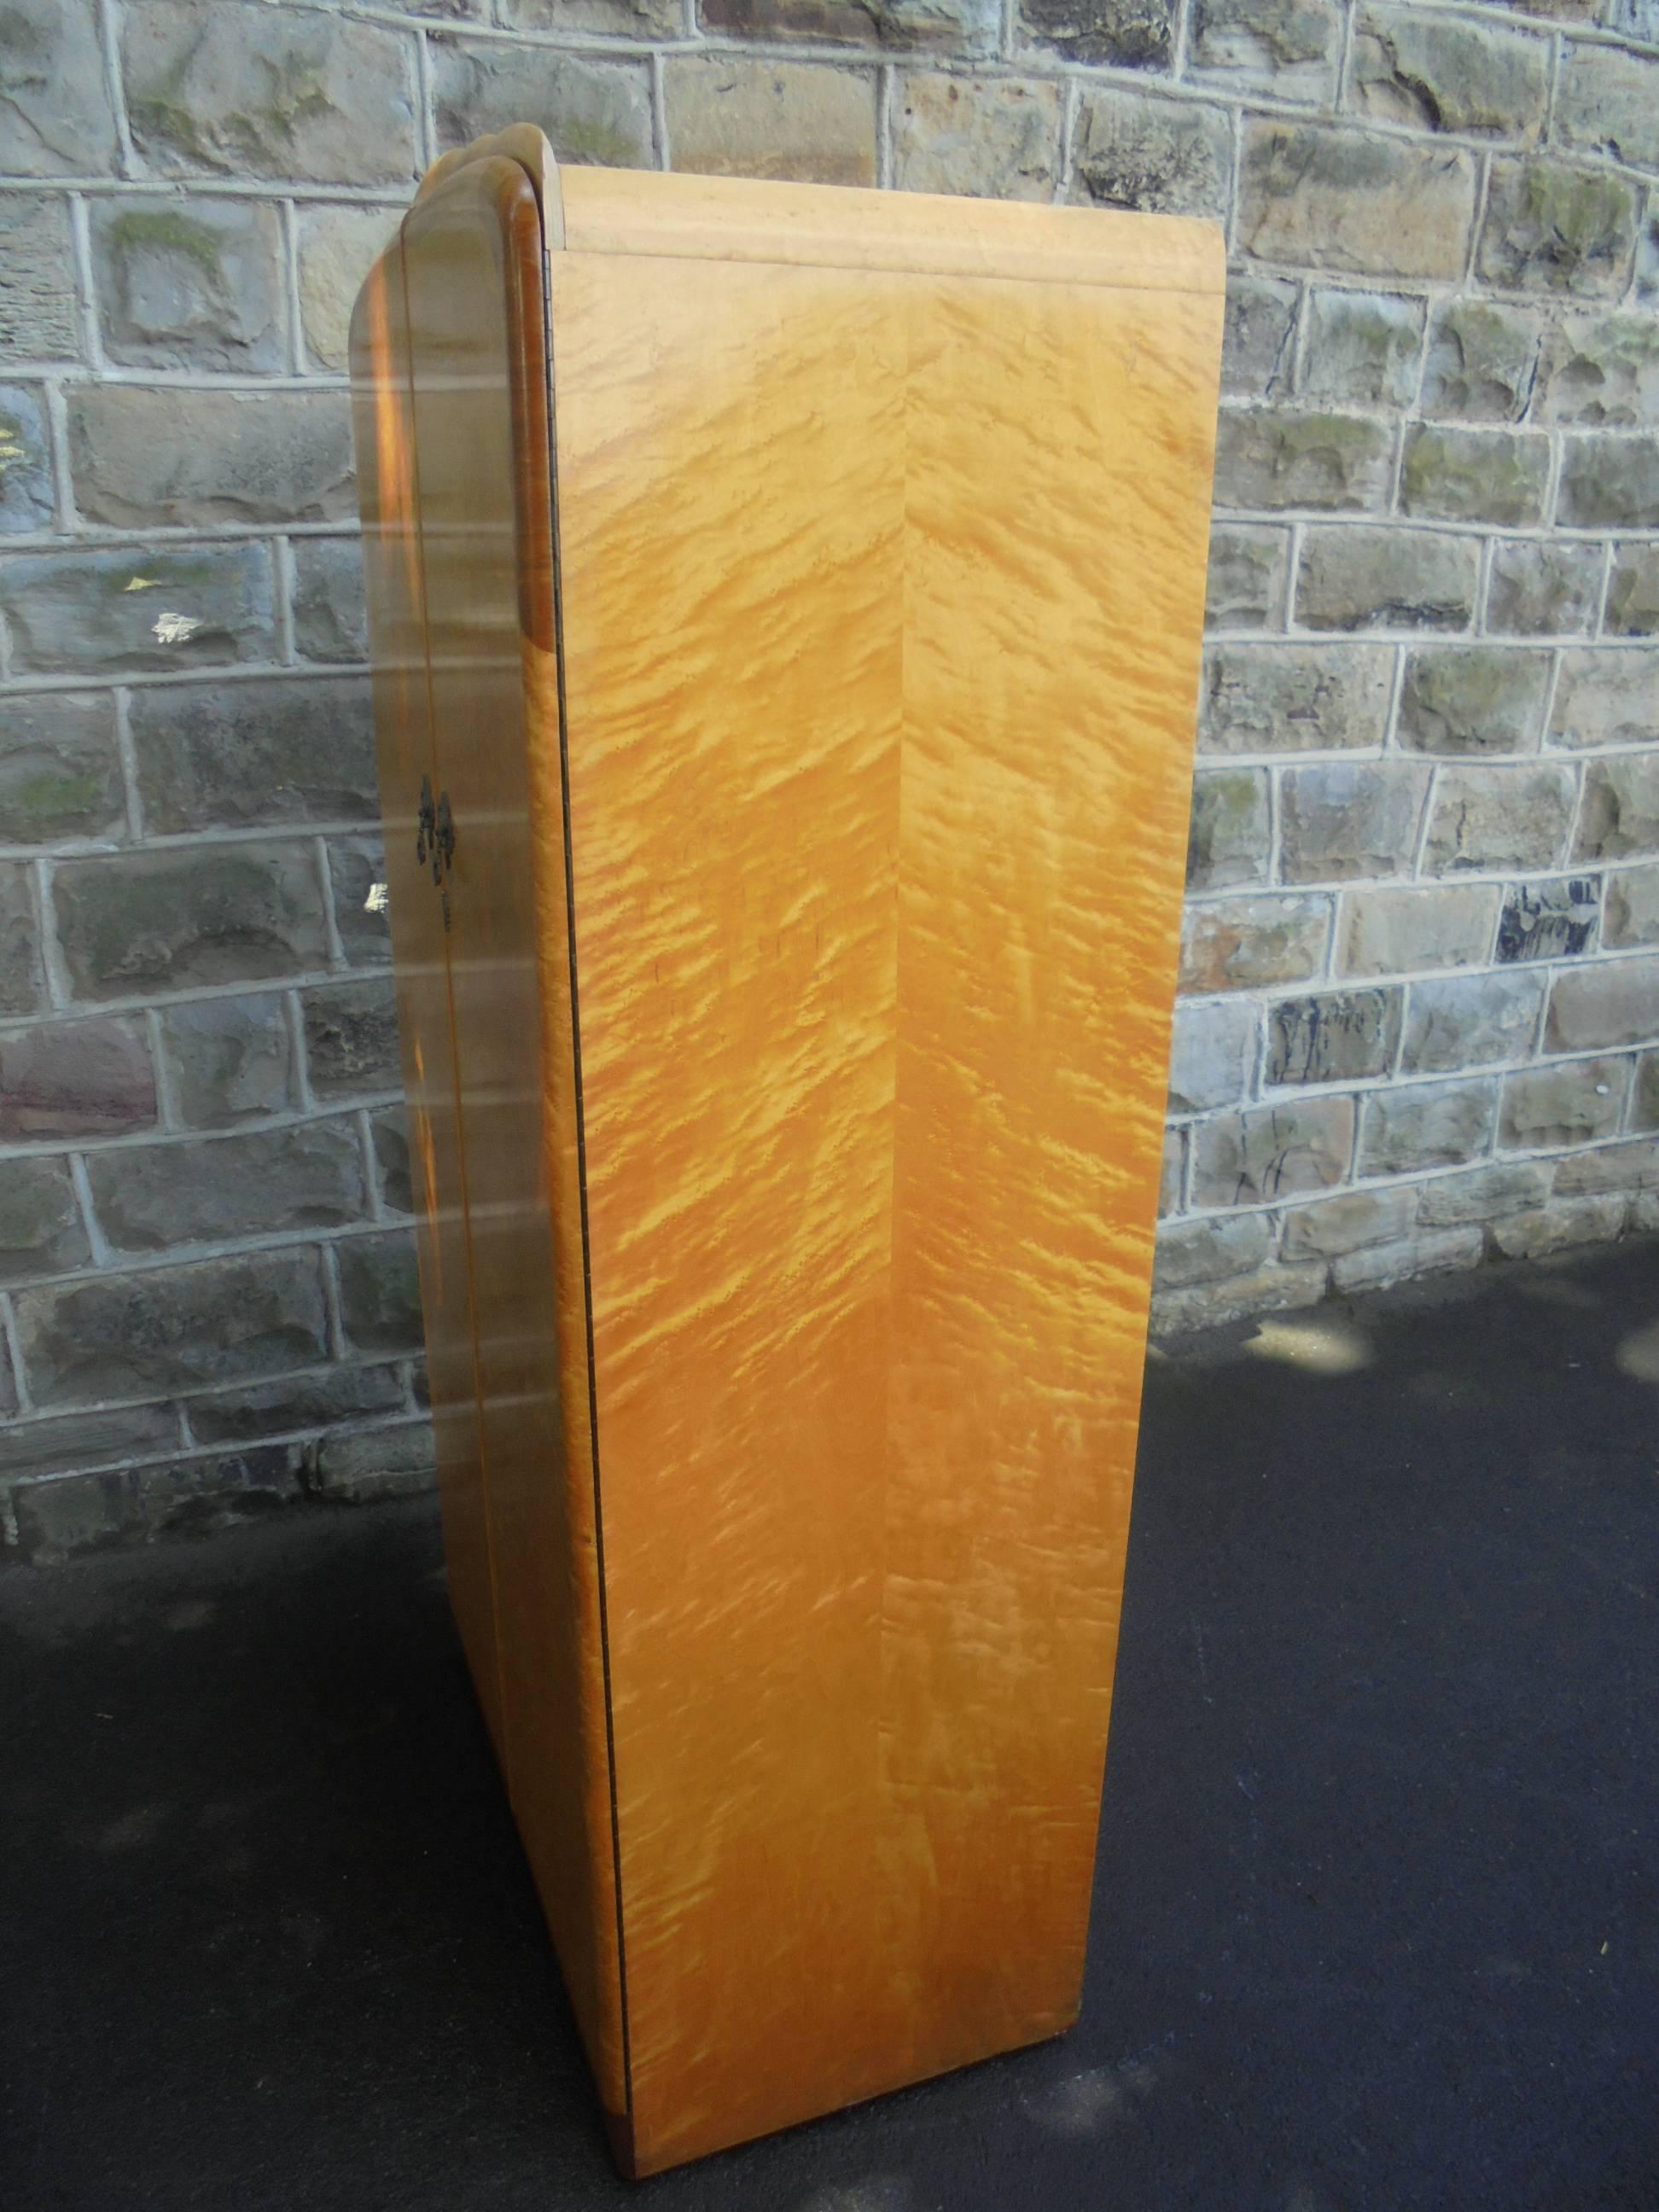 Offered for sale is this Art Deco bird's-eye maple wardrobe armoire. Part of a large bedroom suite we have to offer.

Dating from 1930. Nice design, veneered in bird's-eye maple with walnut trim to the top and plinth. Pair doors, inside there are